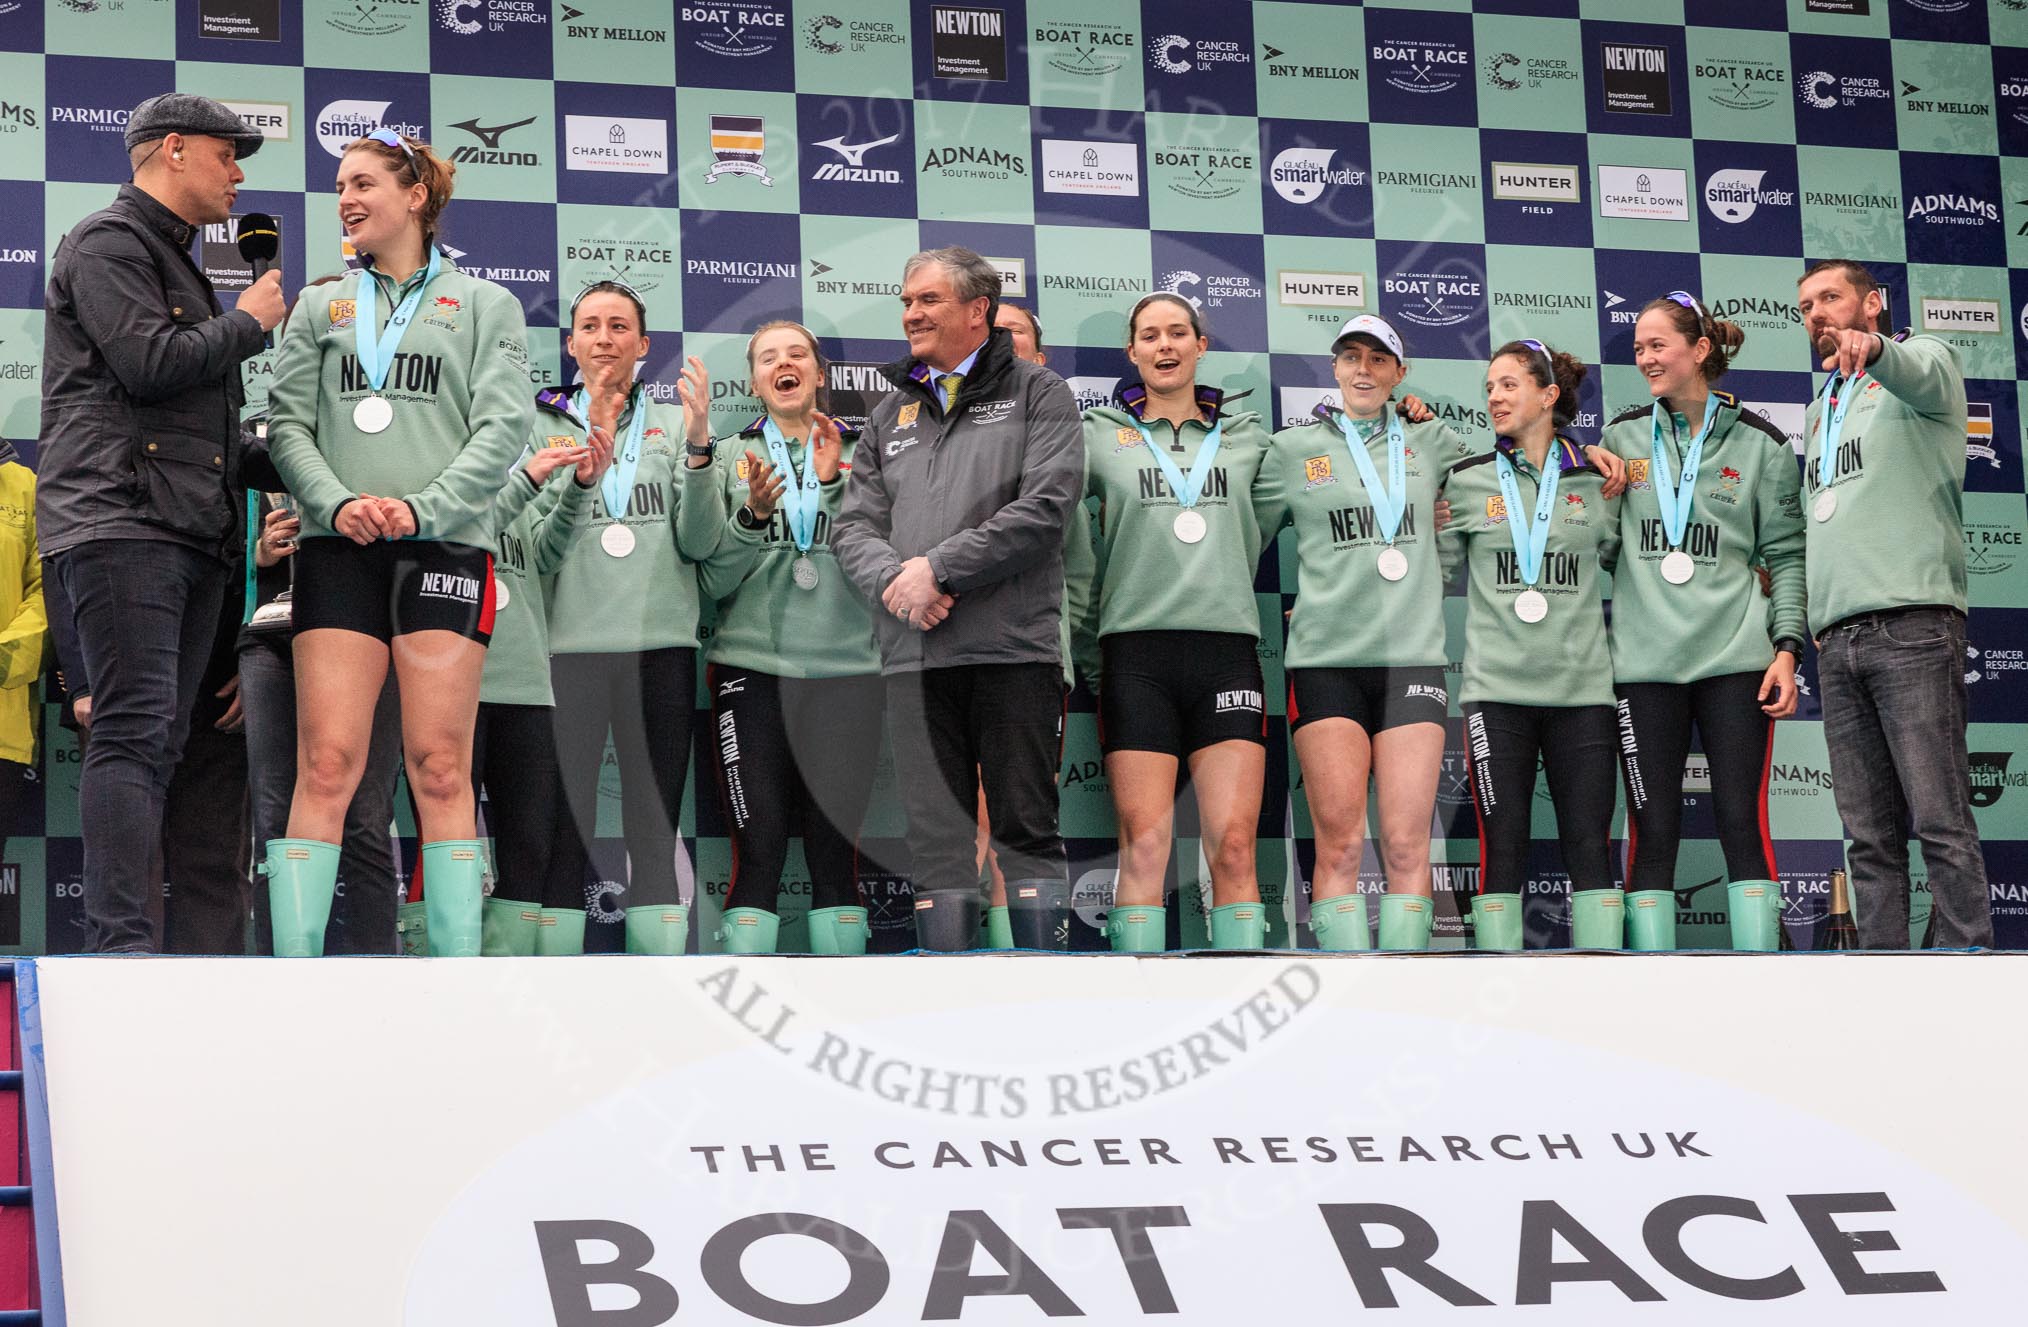 The Cancer Research UK Women's Boat Race 2018: The Women's Boat race trophy presentation - BBC Sport commentator Jason Mohammad, Myriam Goudet-Boukhatmi, Sophie Shapter, Olivia Coffey, Alice White, Boat Race Company director Fergus Murison, behind him Paula Wesselmann, then Thea Zabell, Kelsey Barolak, Imogen Grant, Tricia Smith, and CUWBC Head Coach Rob Baker.
River Thames between Putney Bridge and Mortlake,
London SW15,

United Kingdom,
on 24 March 2018 at 17:08, image #270